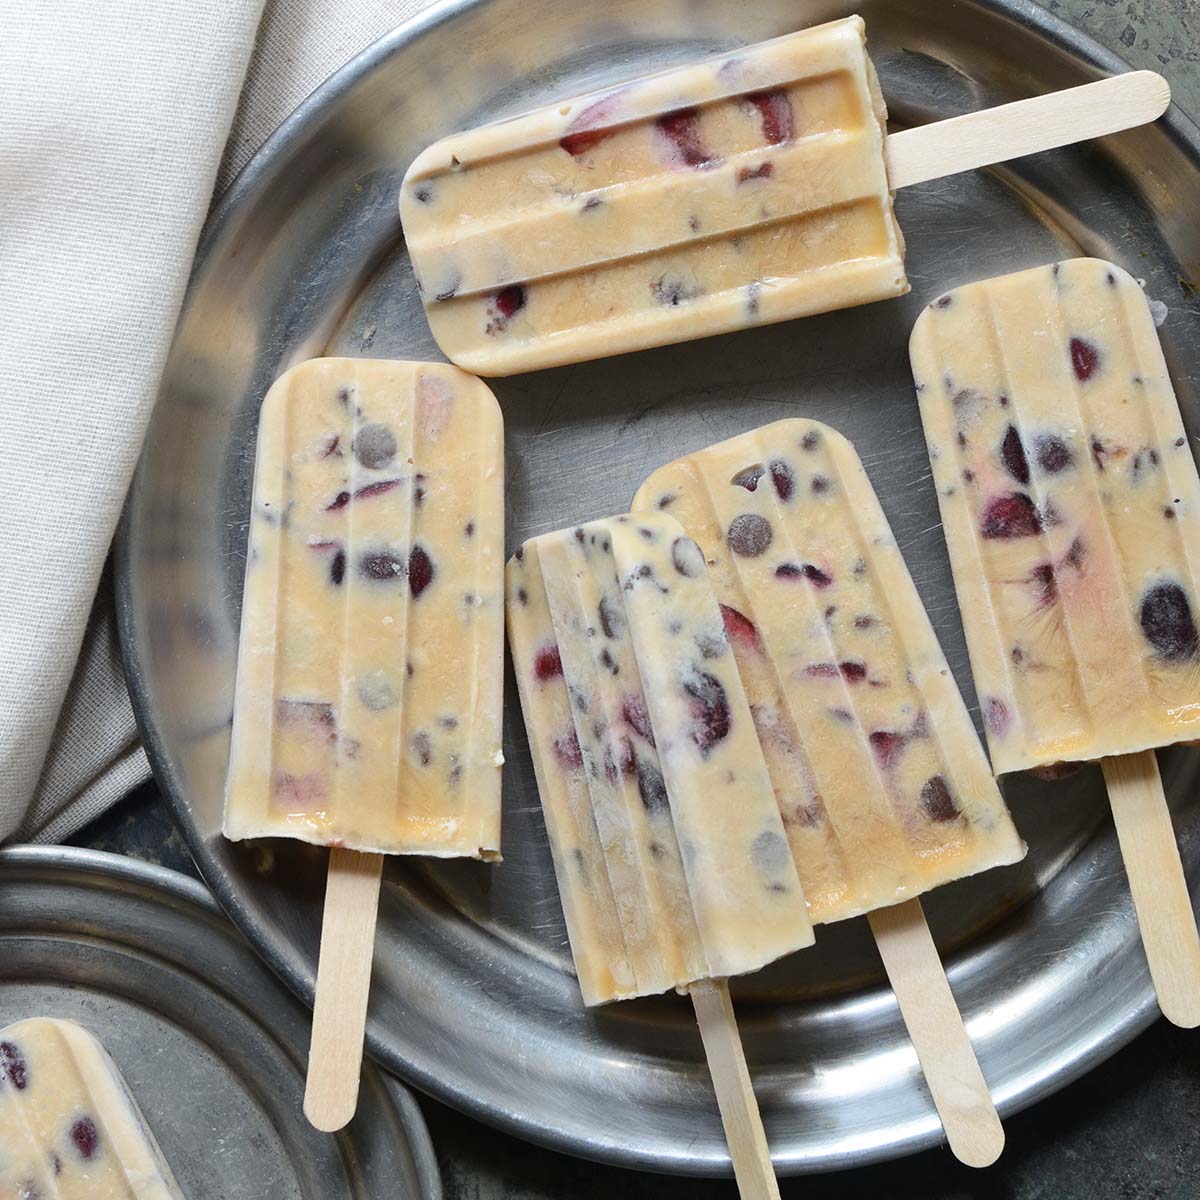 You are currently viewing Crafting Artisanal Milk-Based Popsicles